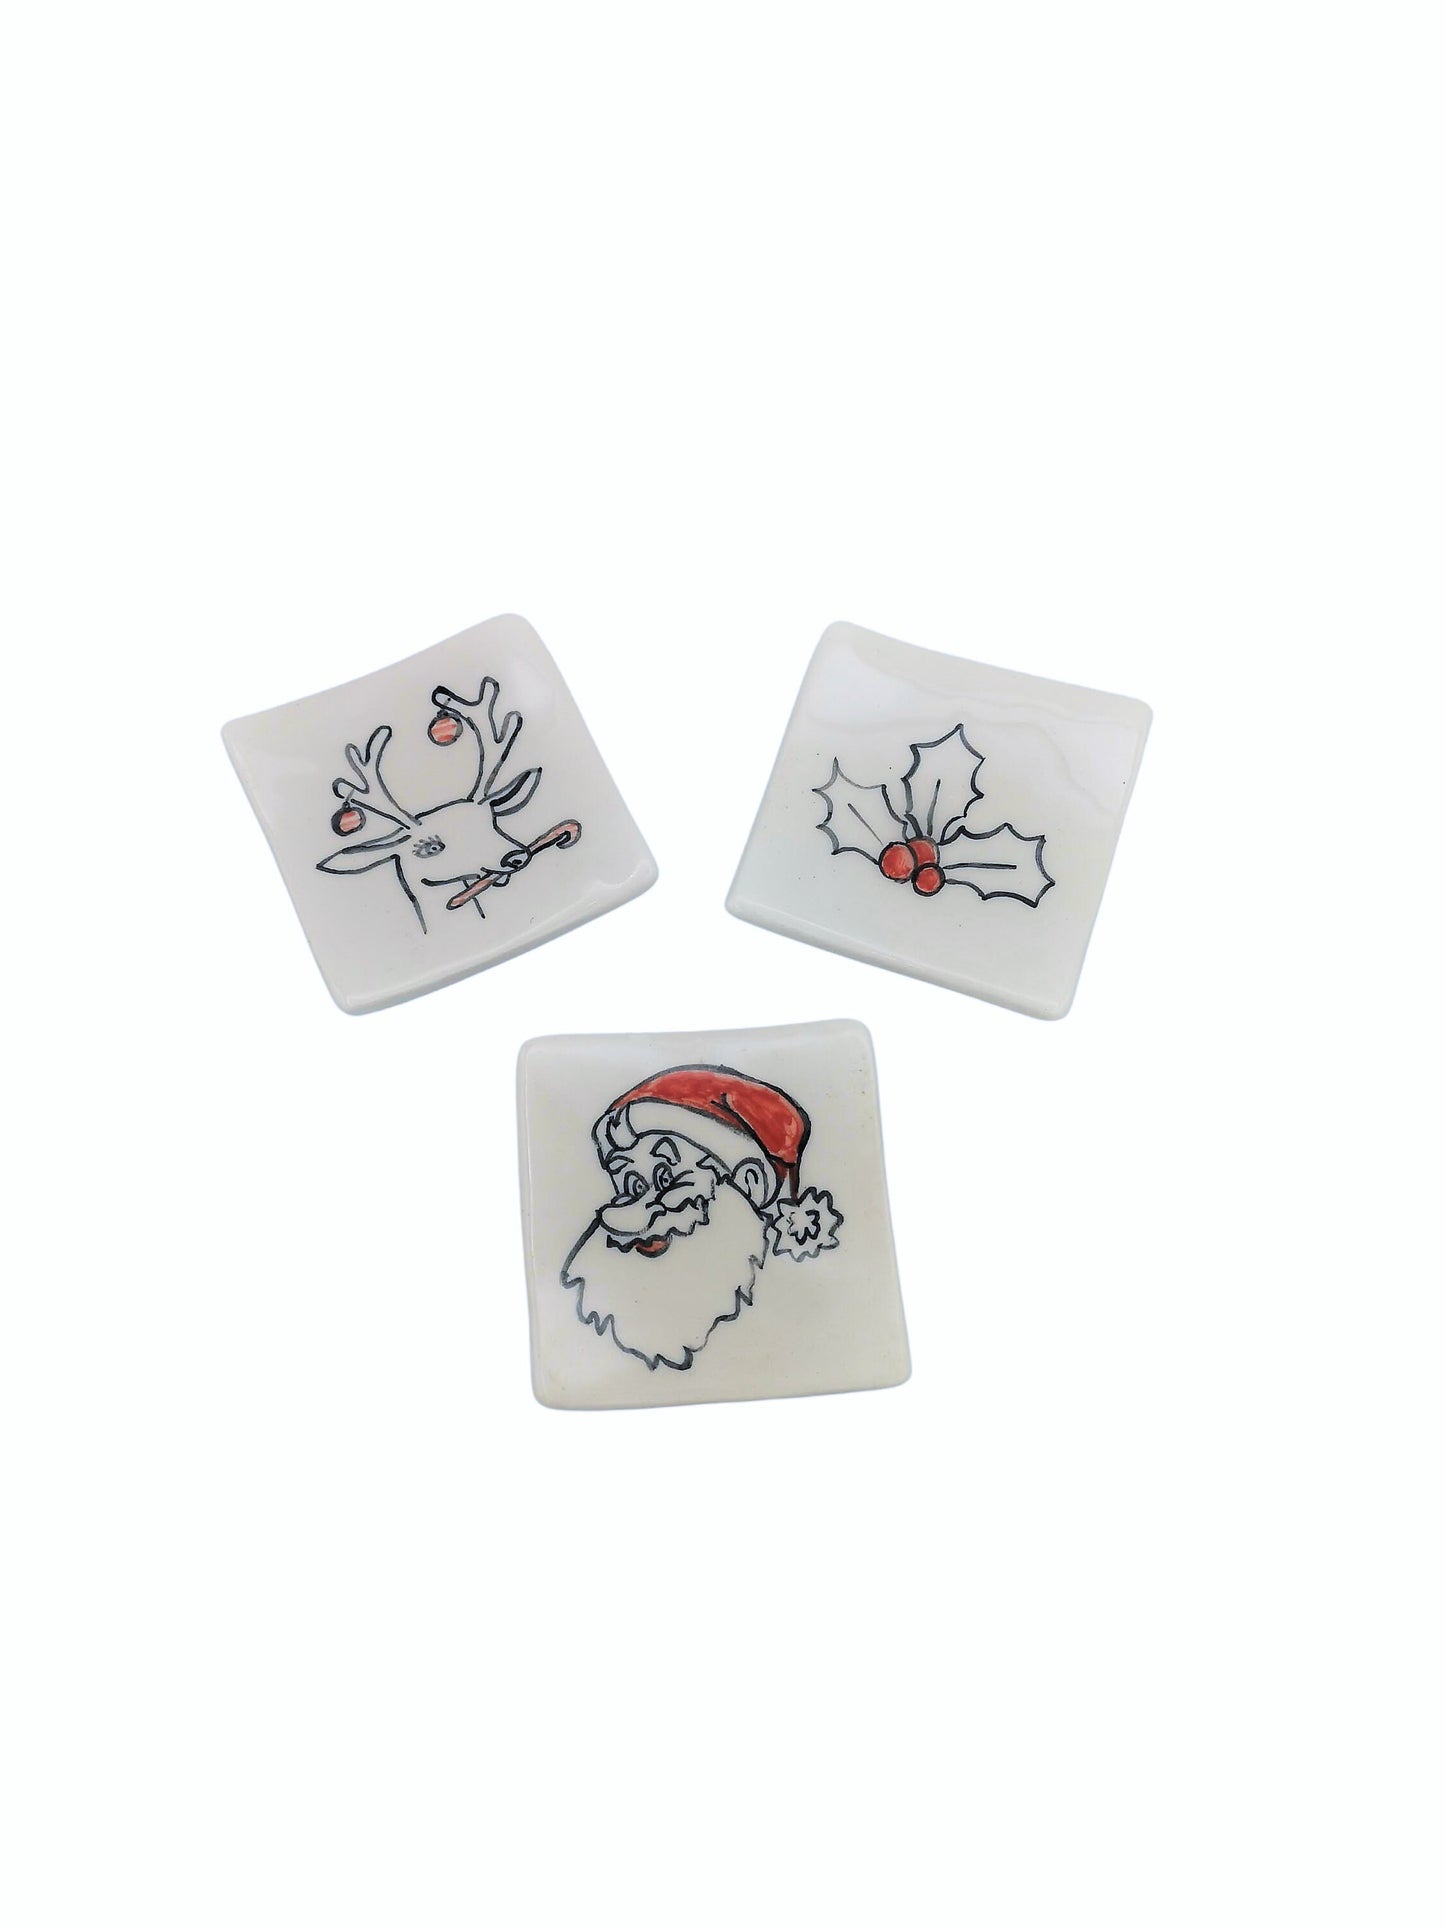 1Pc Handmade Ceramic Trinket Dish With Hand Painted Santa Claus, Holly or Reindeer, Candle Holder, Square Clay Ring Holder Best Gift For Her - Ceramica Ana Rafael